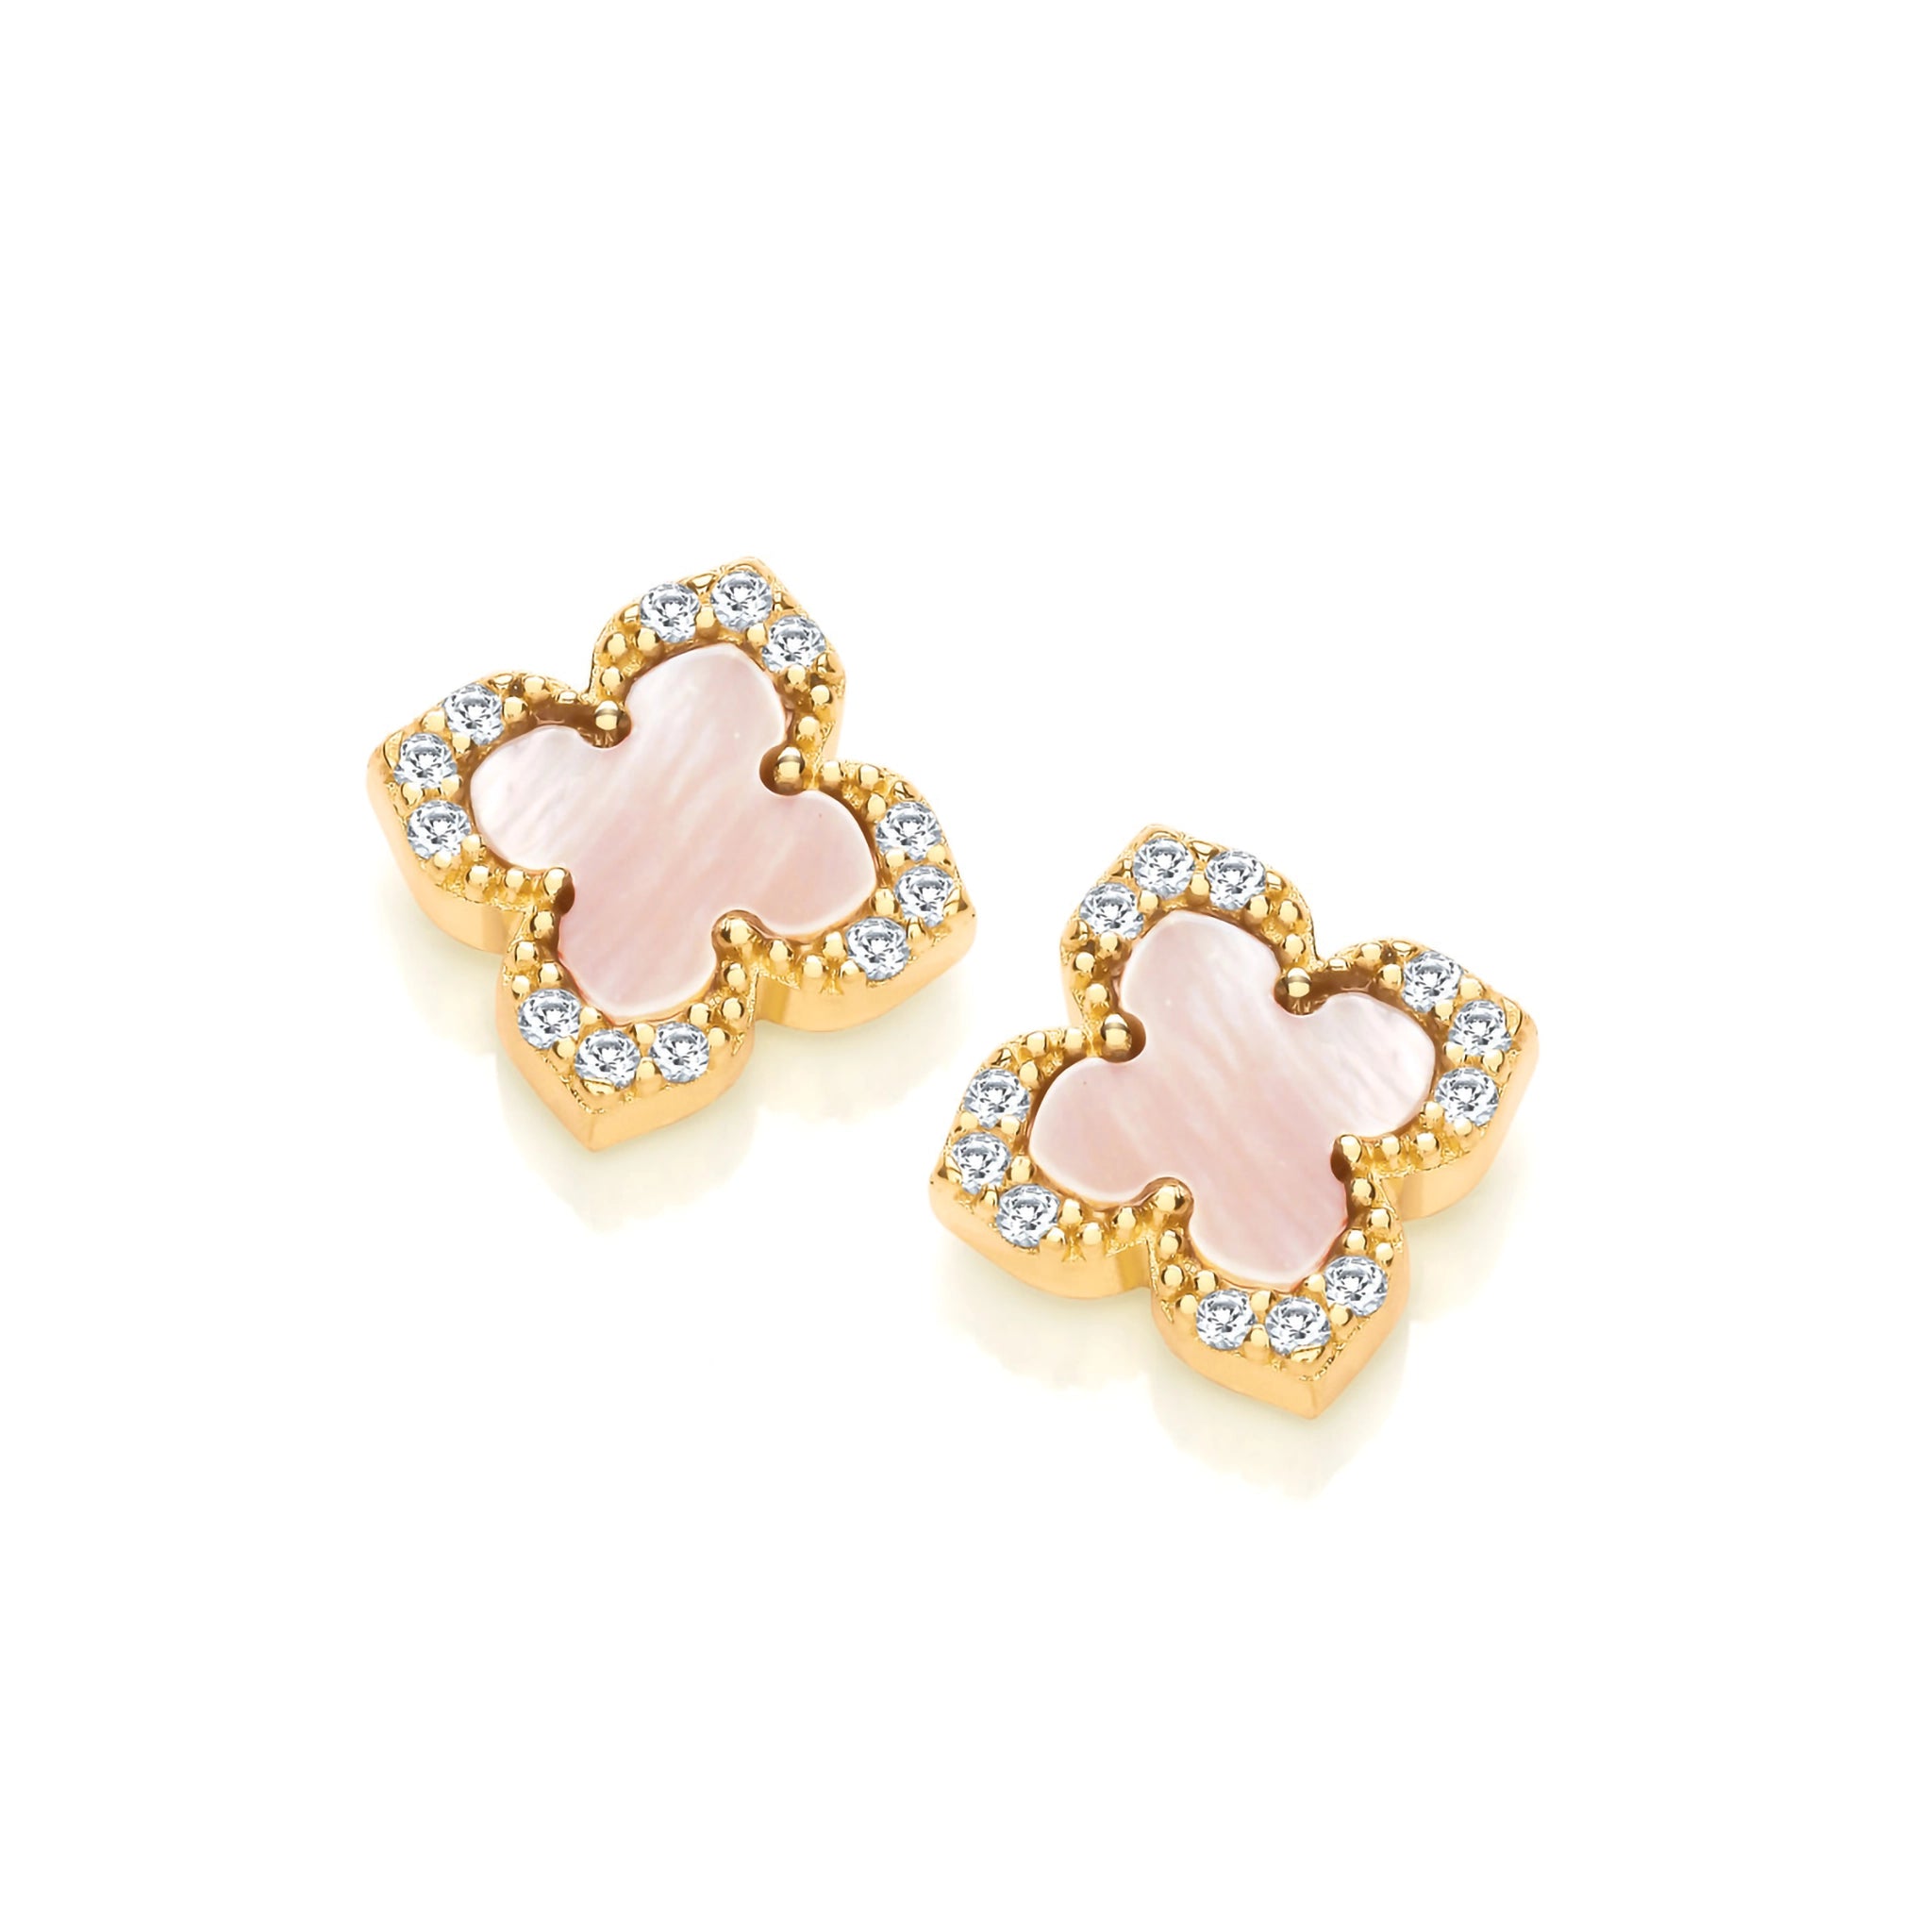 A pair of gold clover shaped earrings with CZ stones and pink mother of pearl in the centre